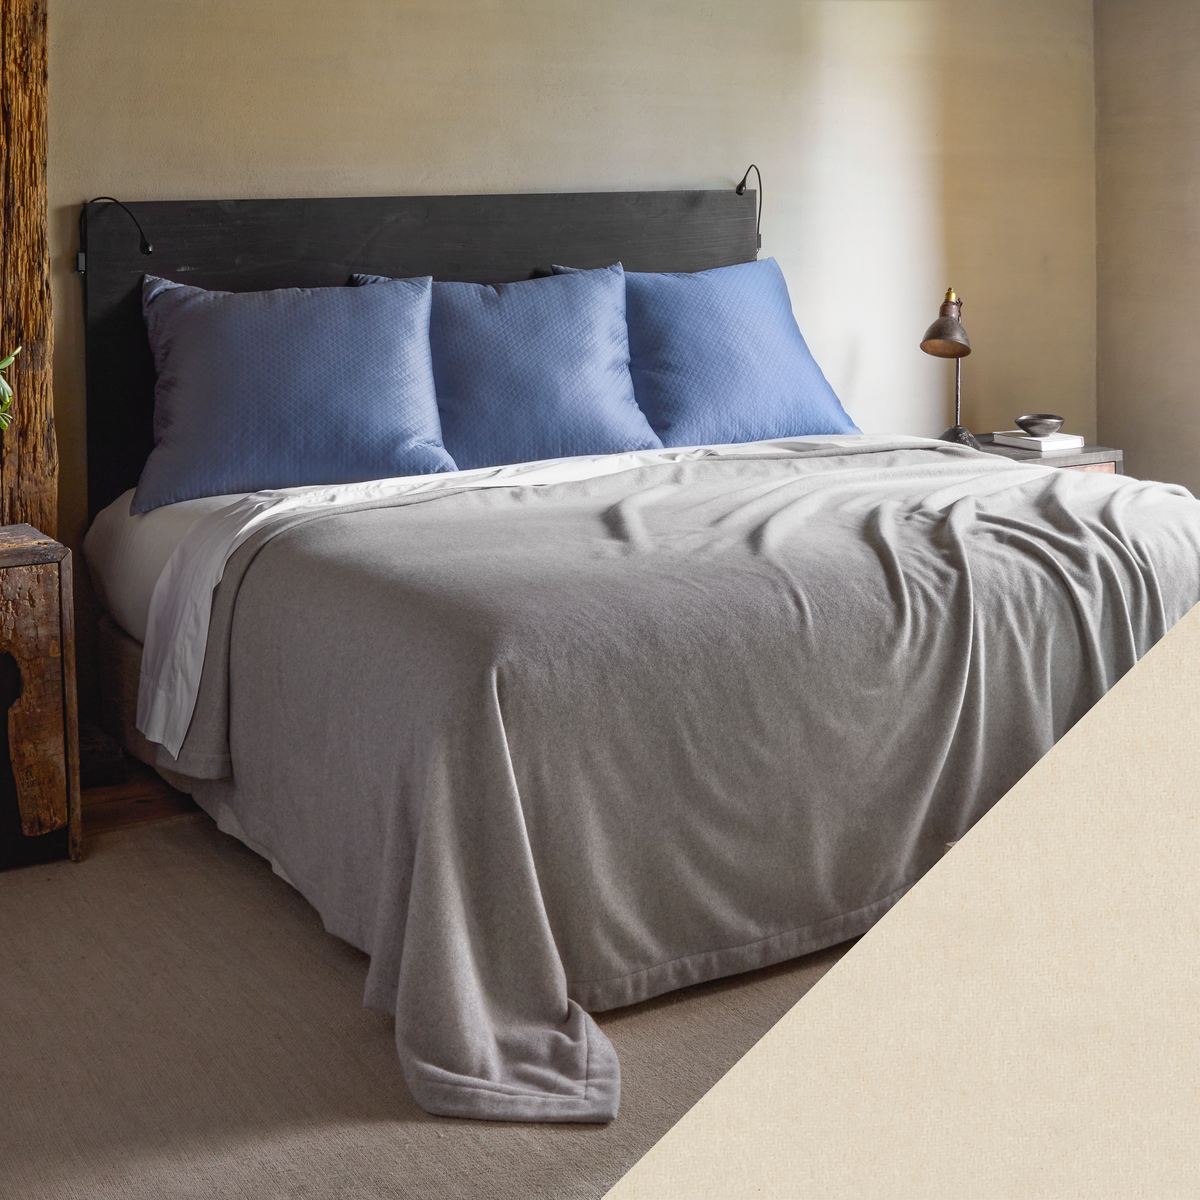 Lifestyle Full Bedding of Matouk Venus Collection in Ivory Color